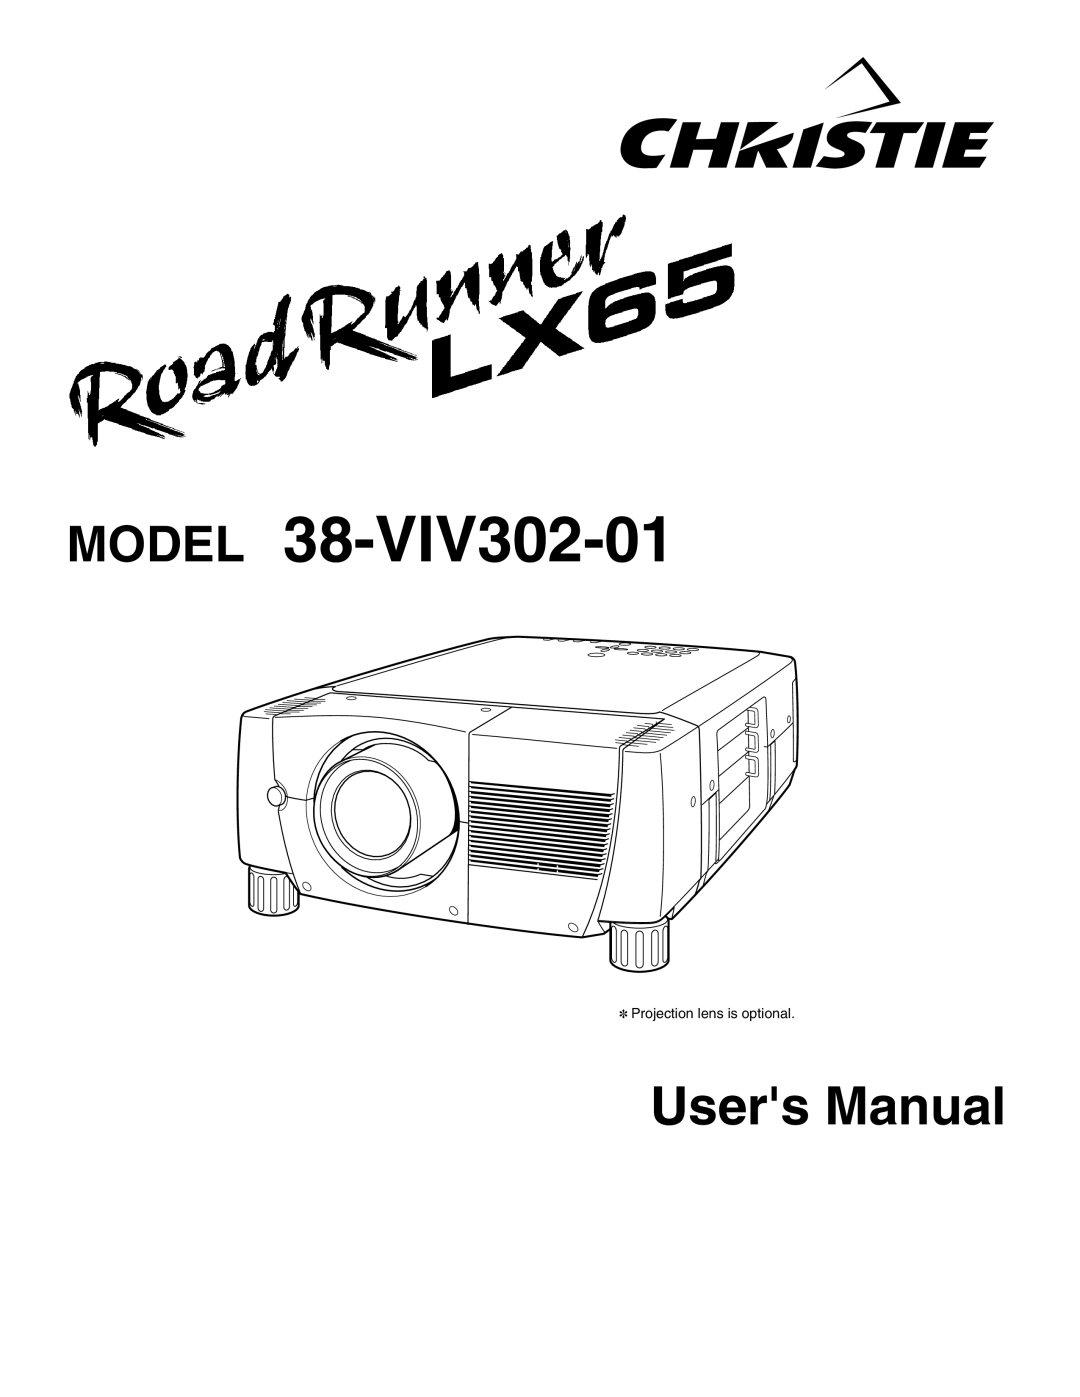 Christie Digital Systems 38-VIV302-01 user manual Model, Users Manual, Projection lens is optional 